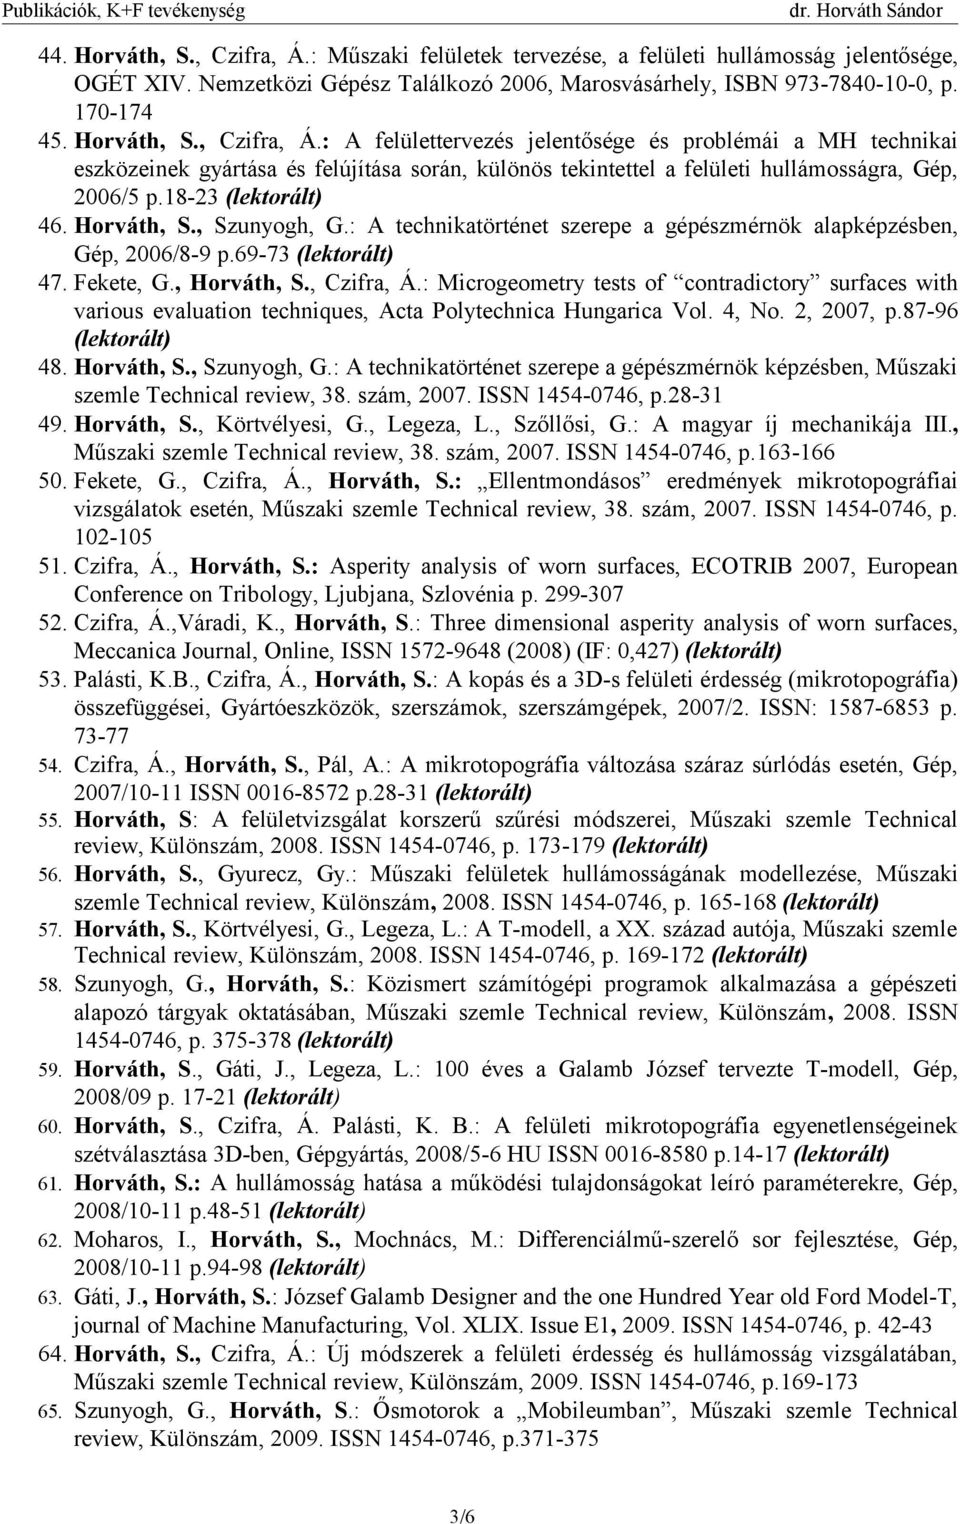 : Microgeometry tests of contradictory surfaces with various evaluation techniques, Acta Polytechnica Hungarica Vol. 4, No. 2, 2007, p.87-96 48. Horváth, S., Szunyogh, G.